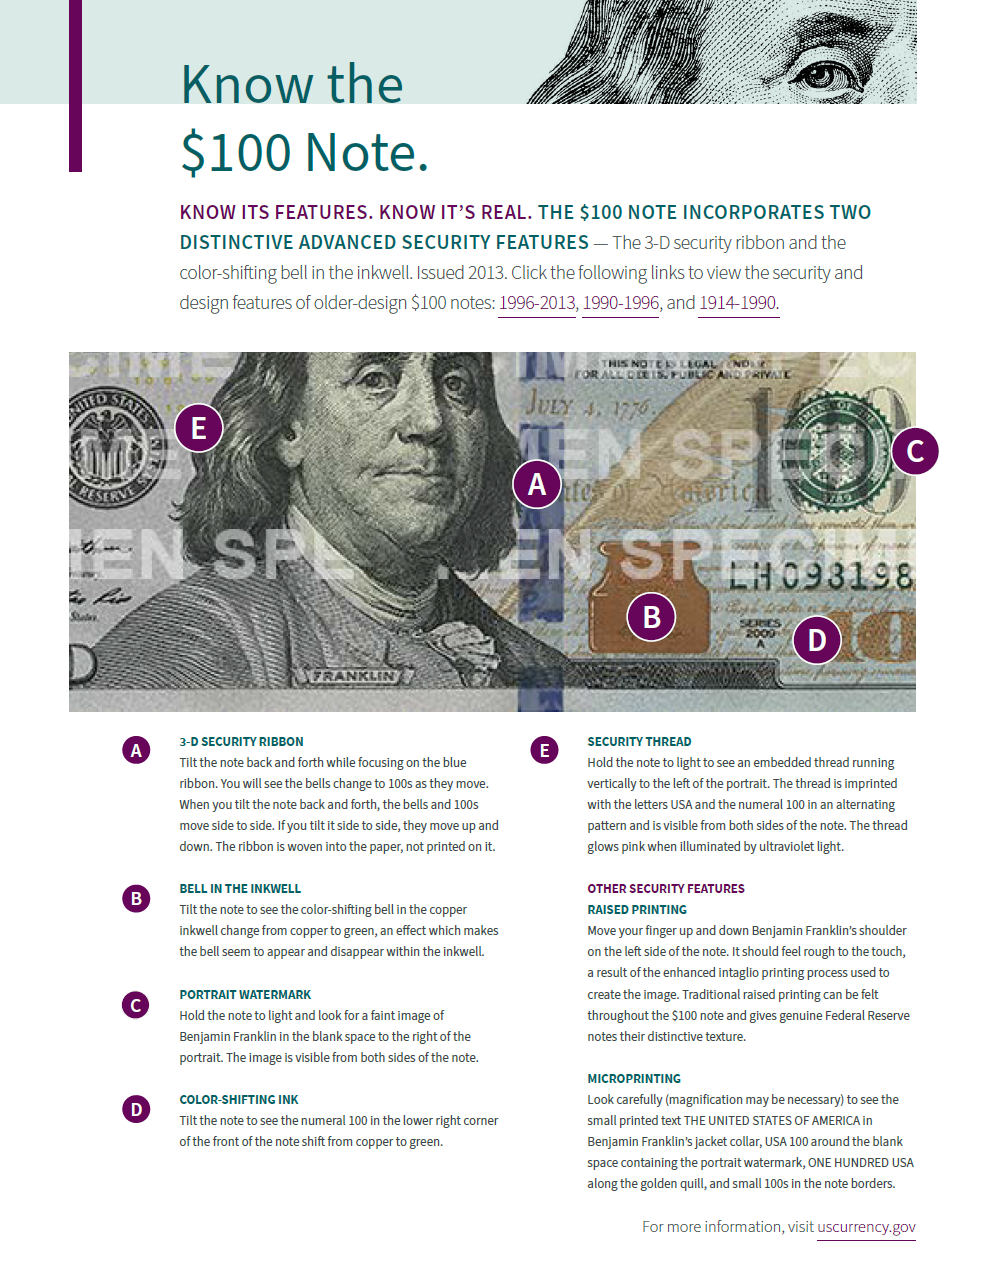 An image of the “Know the $100 Note” page in the Cashier Toolkit detailing several security and design features of $100 Federal Reserve notes.